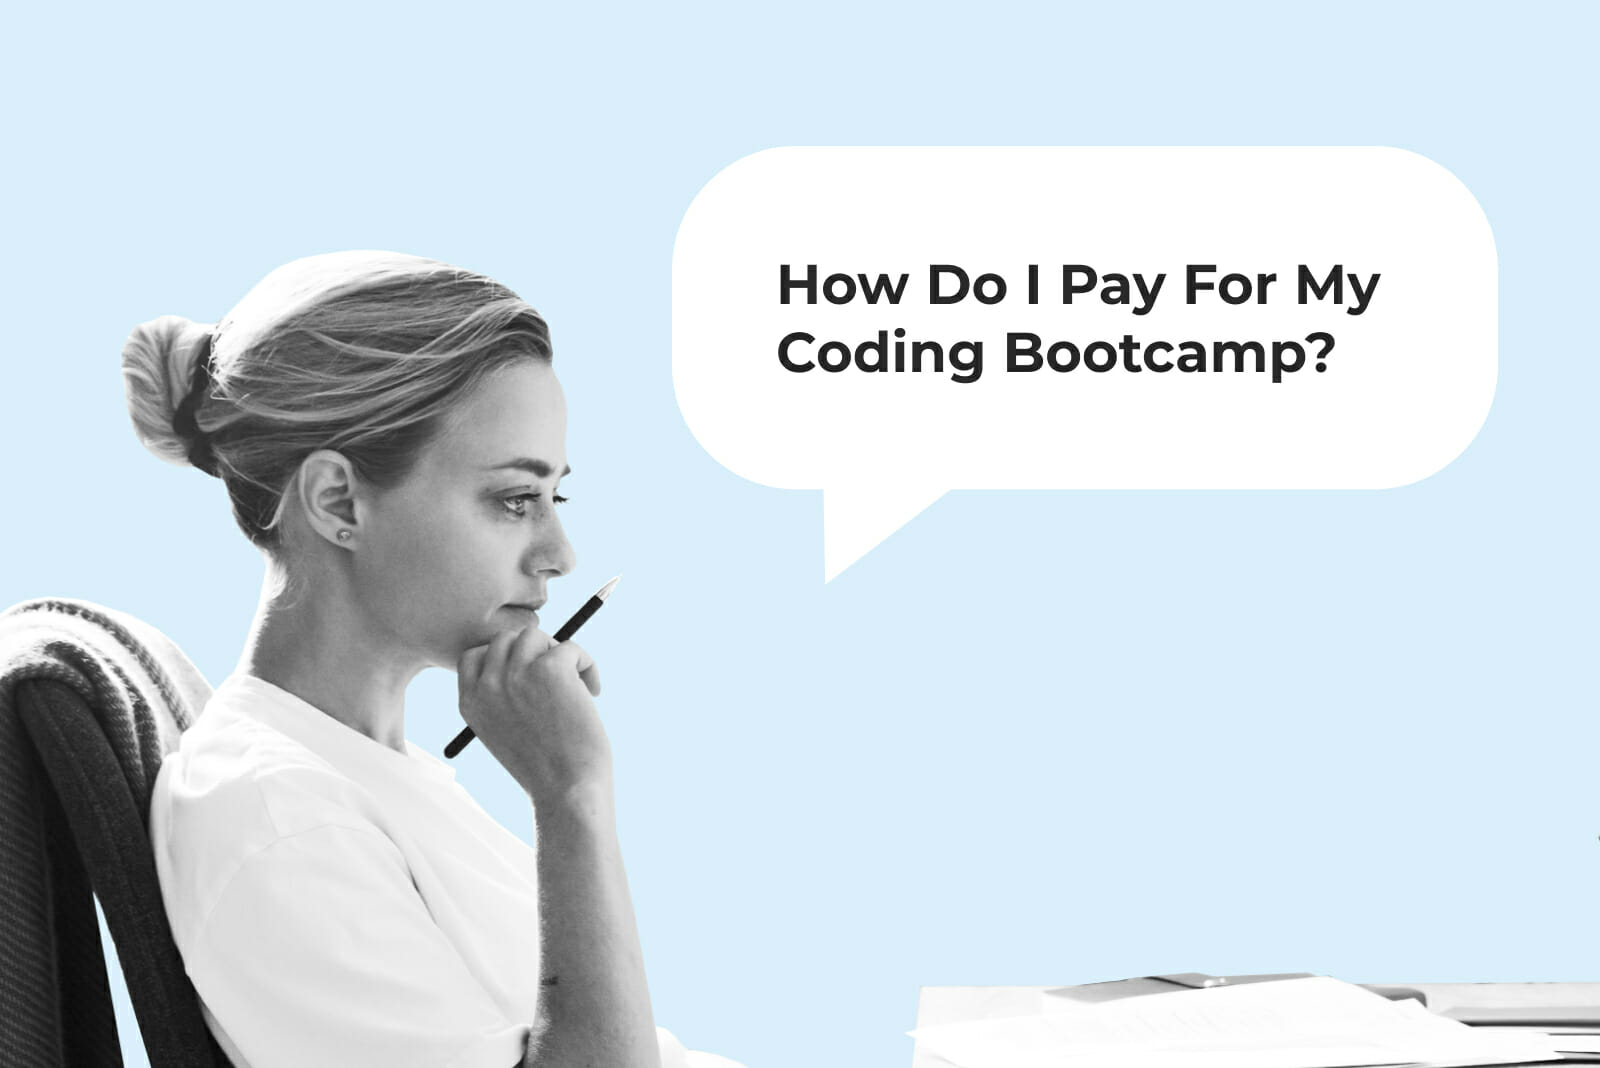 Woman sitting on a chair with pen in hand in front of a desk contemplates how to pay for coding bootcamp before a light blue background